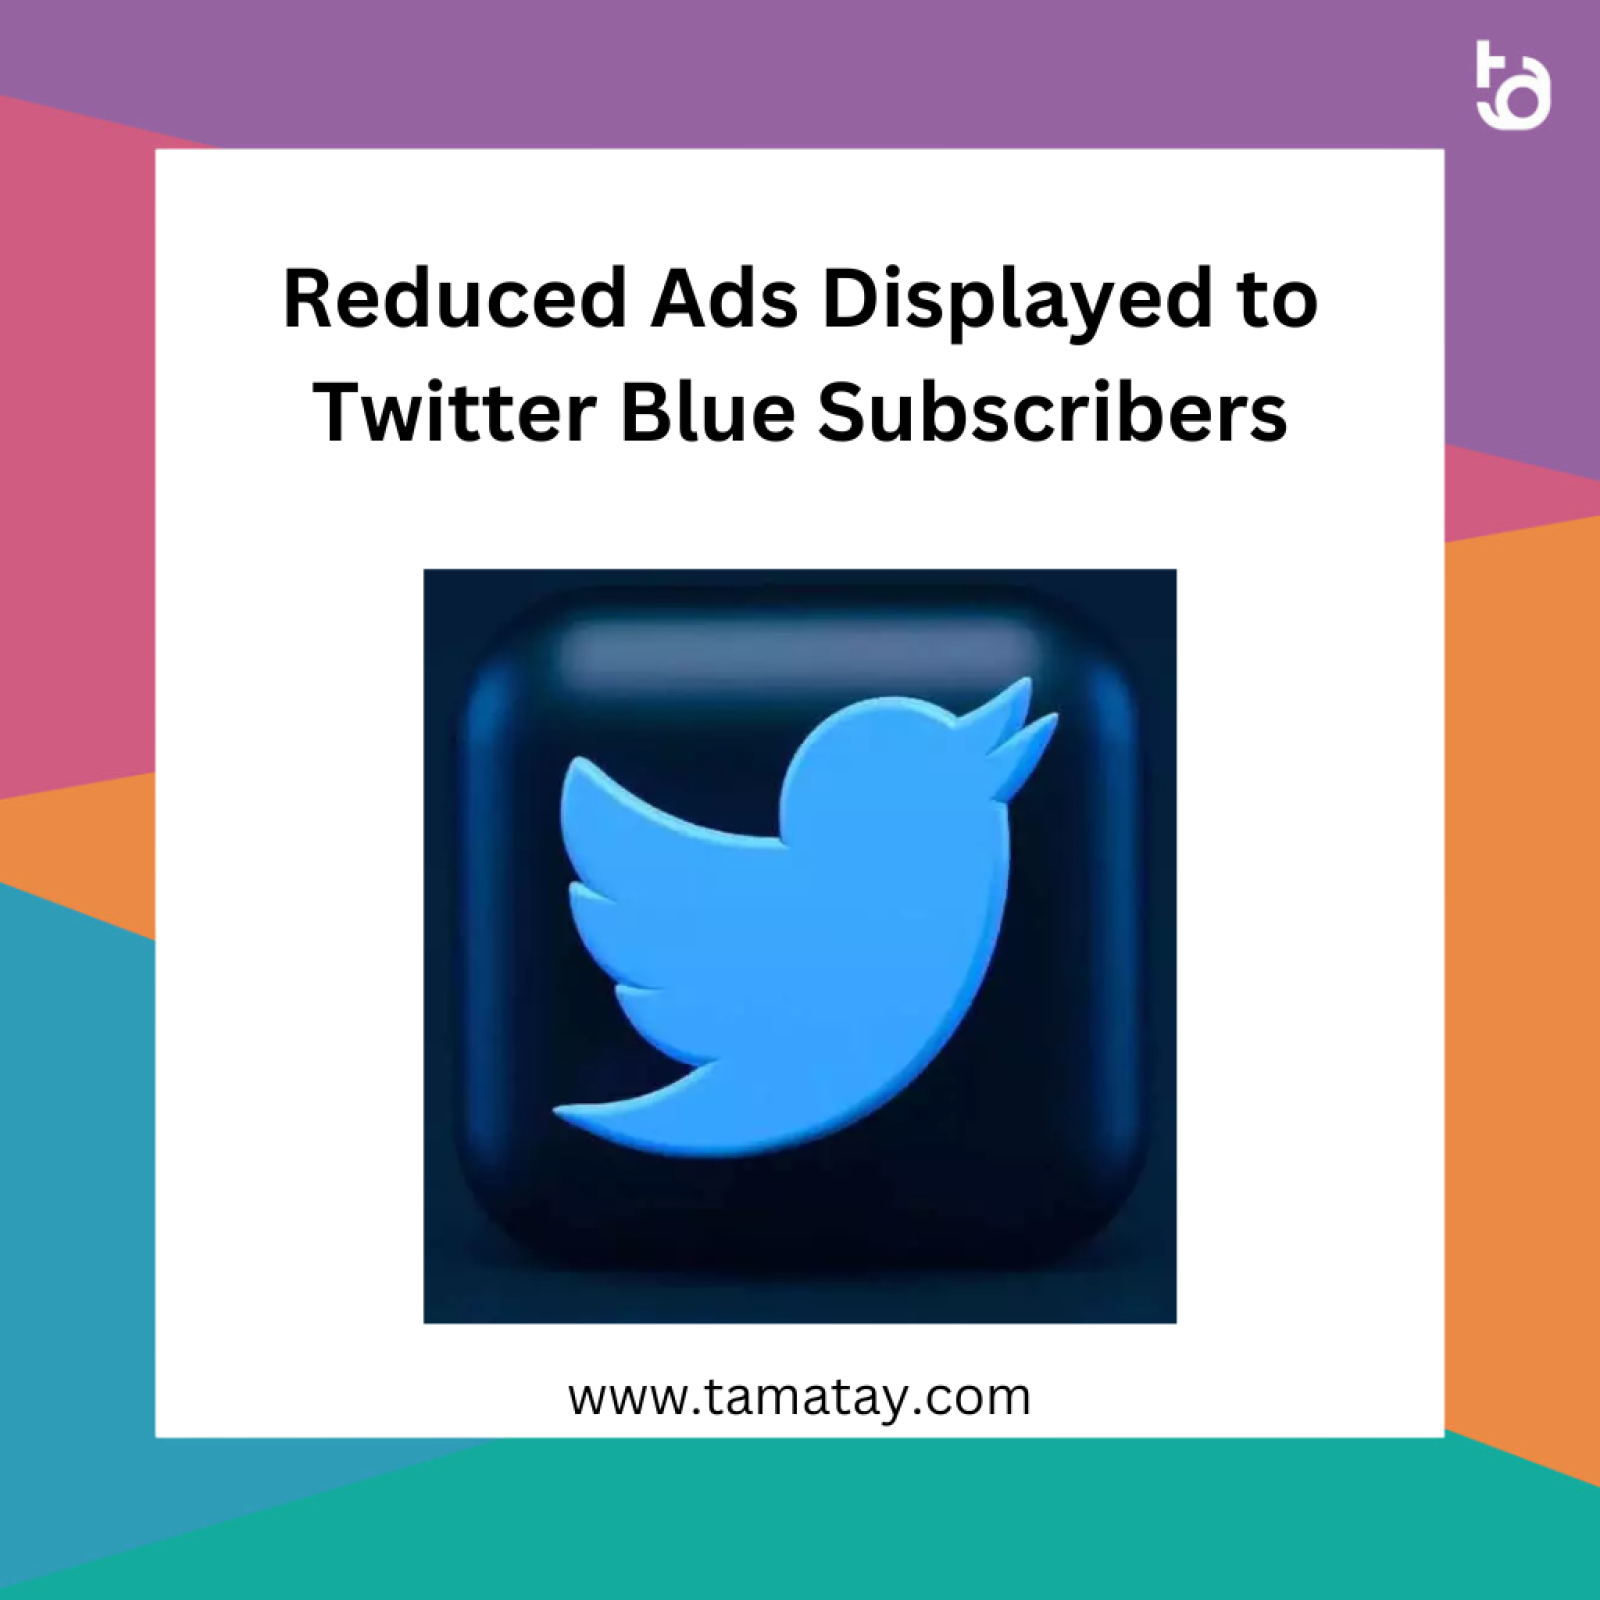 Reduced Ads Displayed to Twitter Blue Subscribers